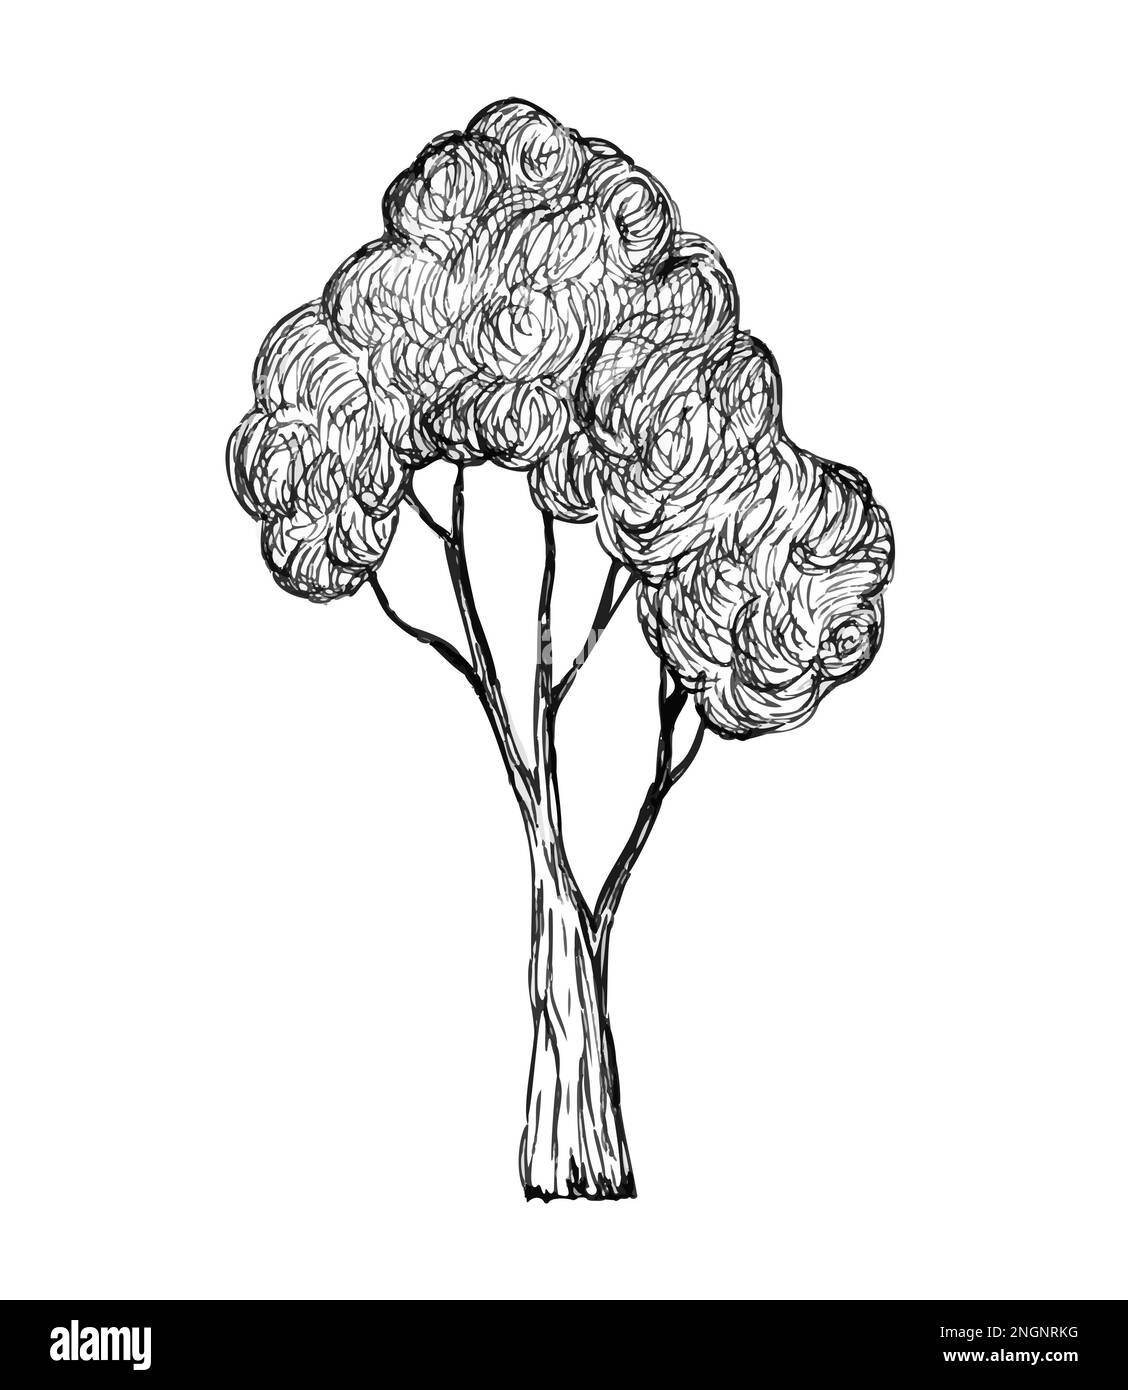 tree in graphics. Hand drawn engraving style Stock Photo